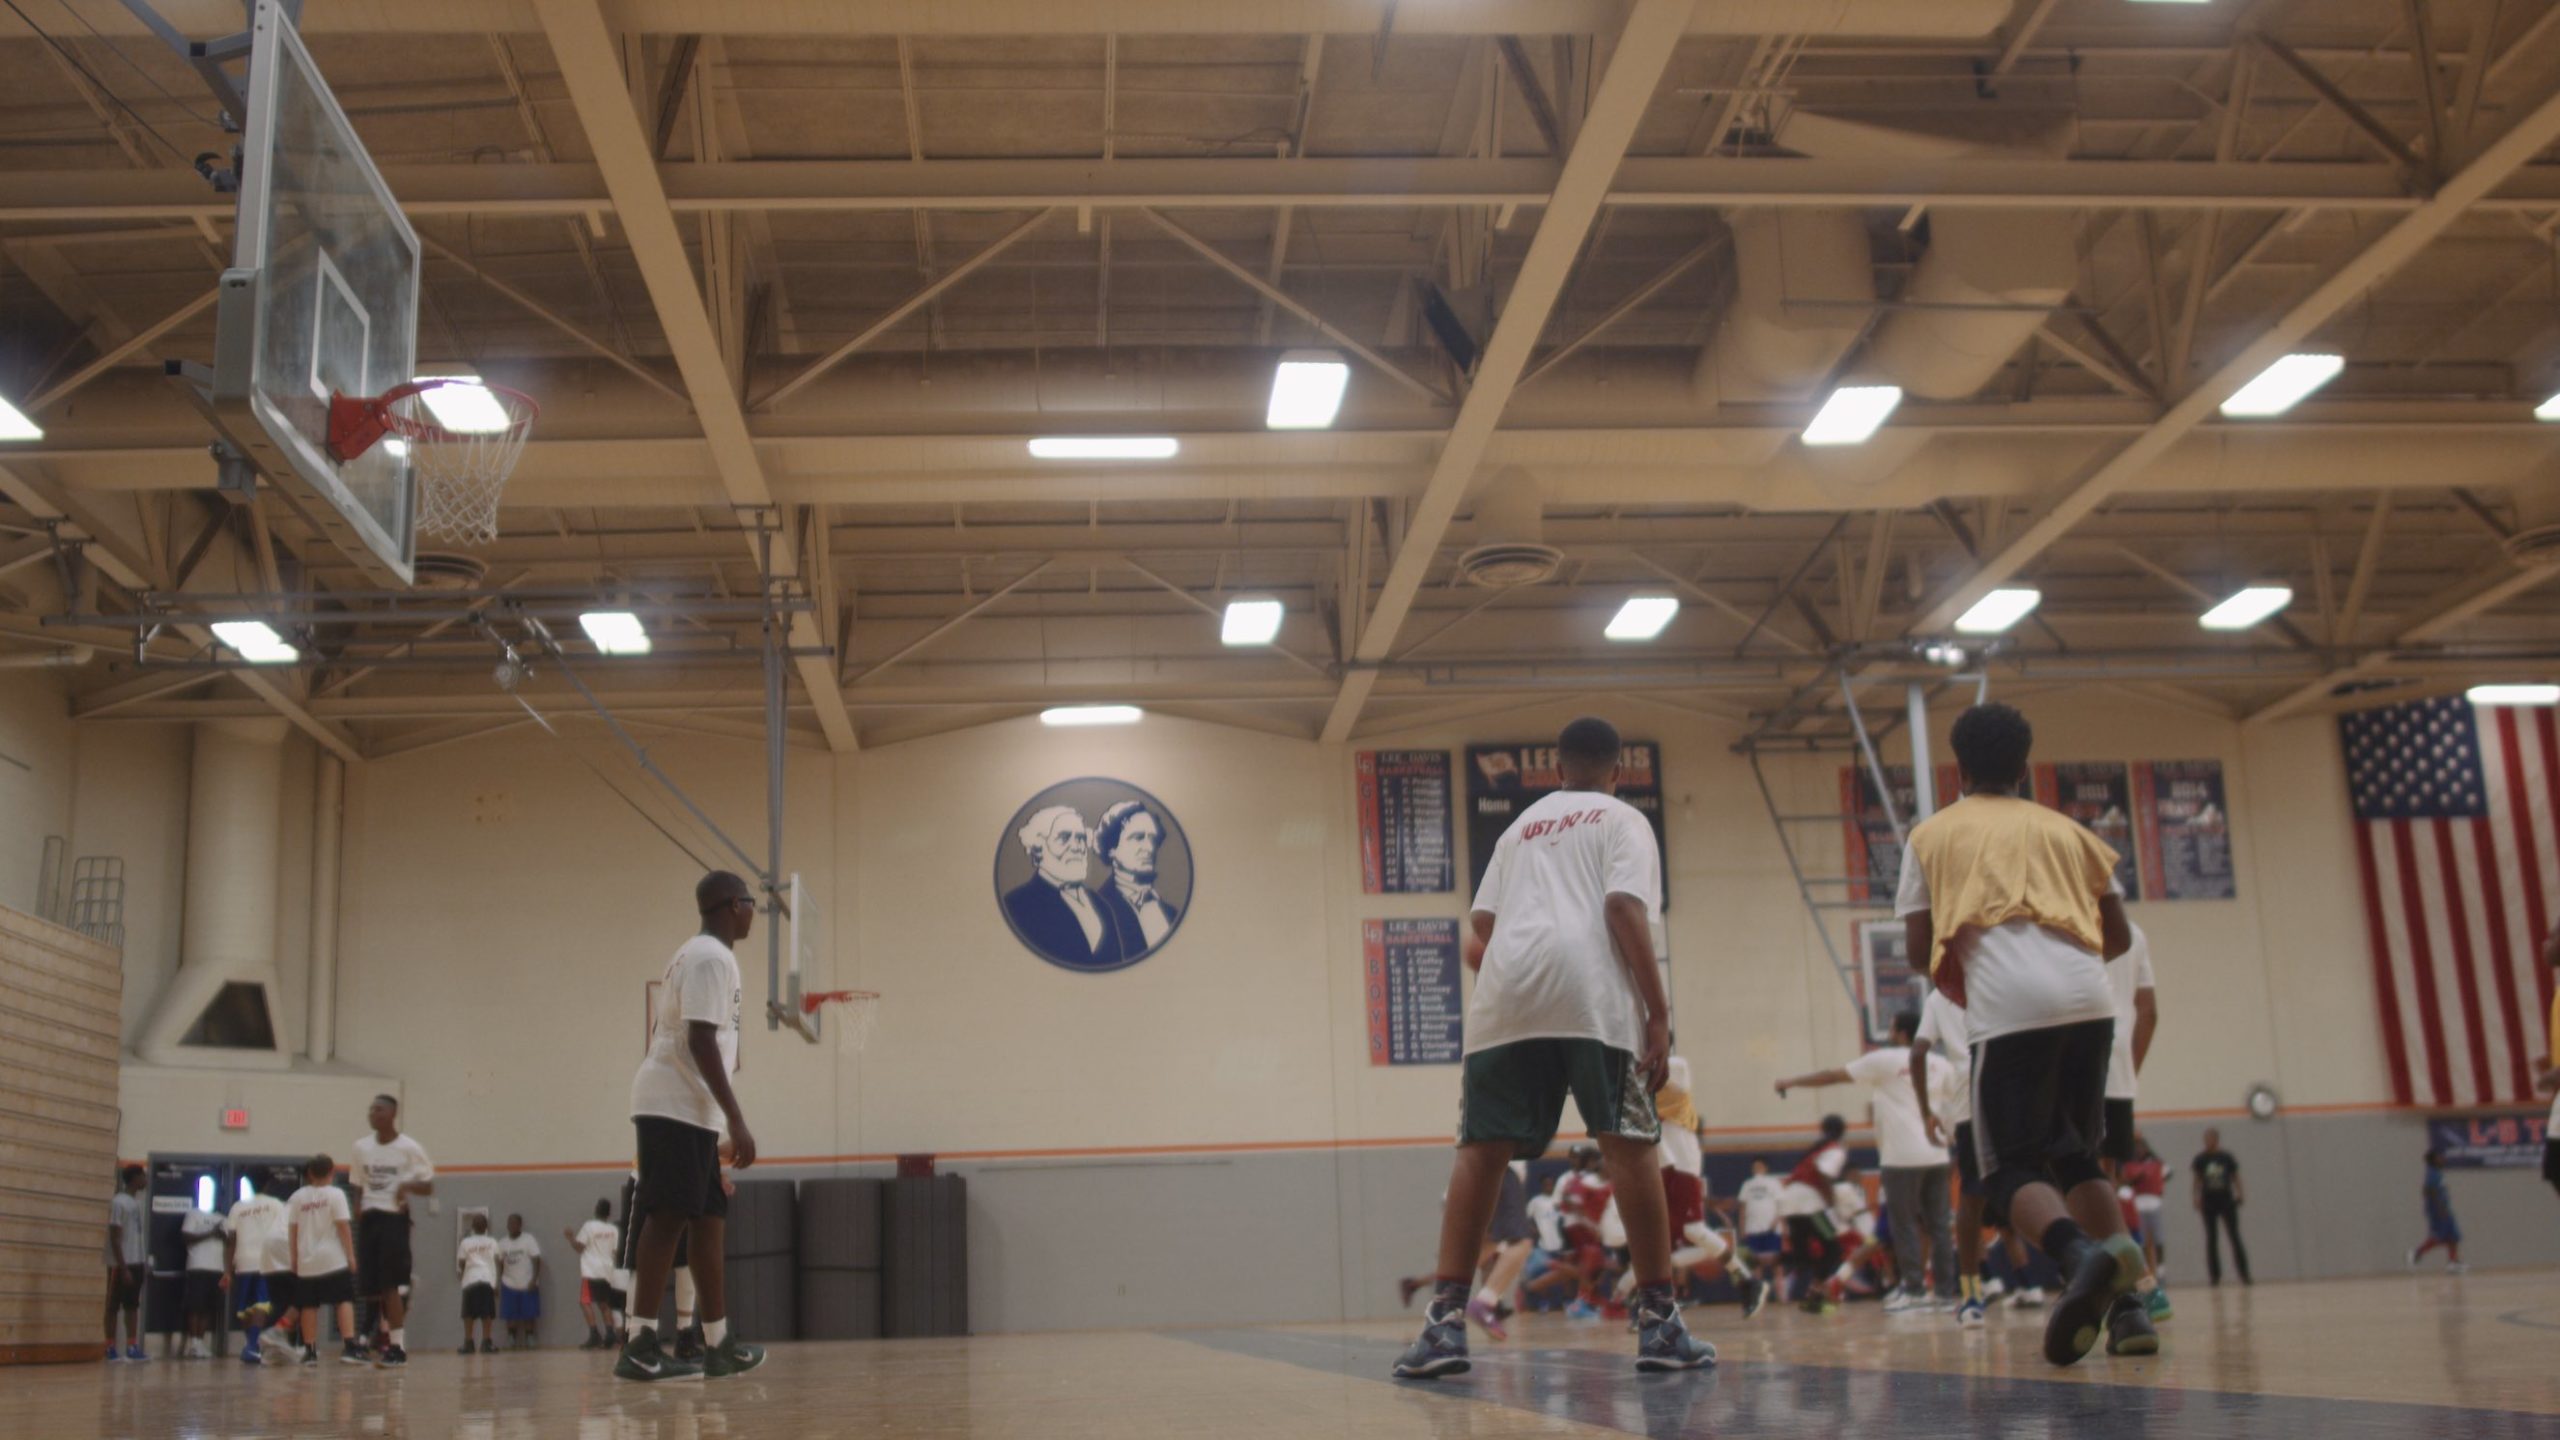 Sportsblog, a documentary mini series A group of men playing on a basketball court